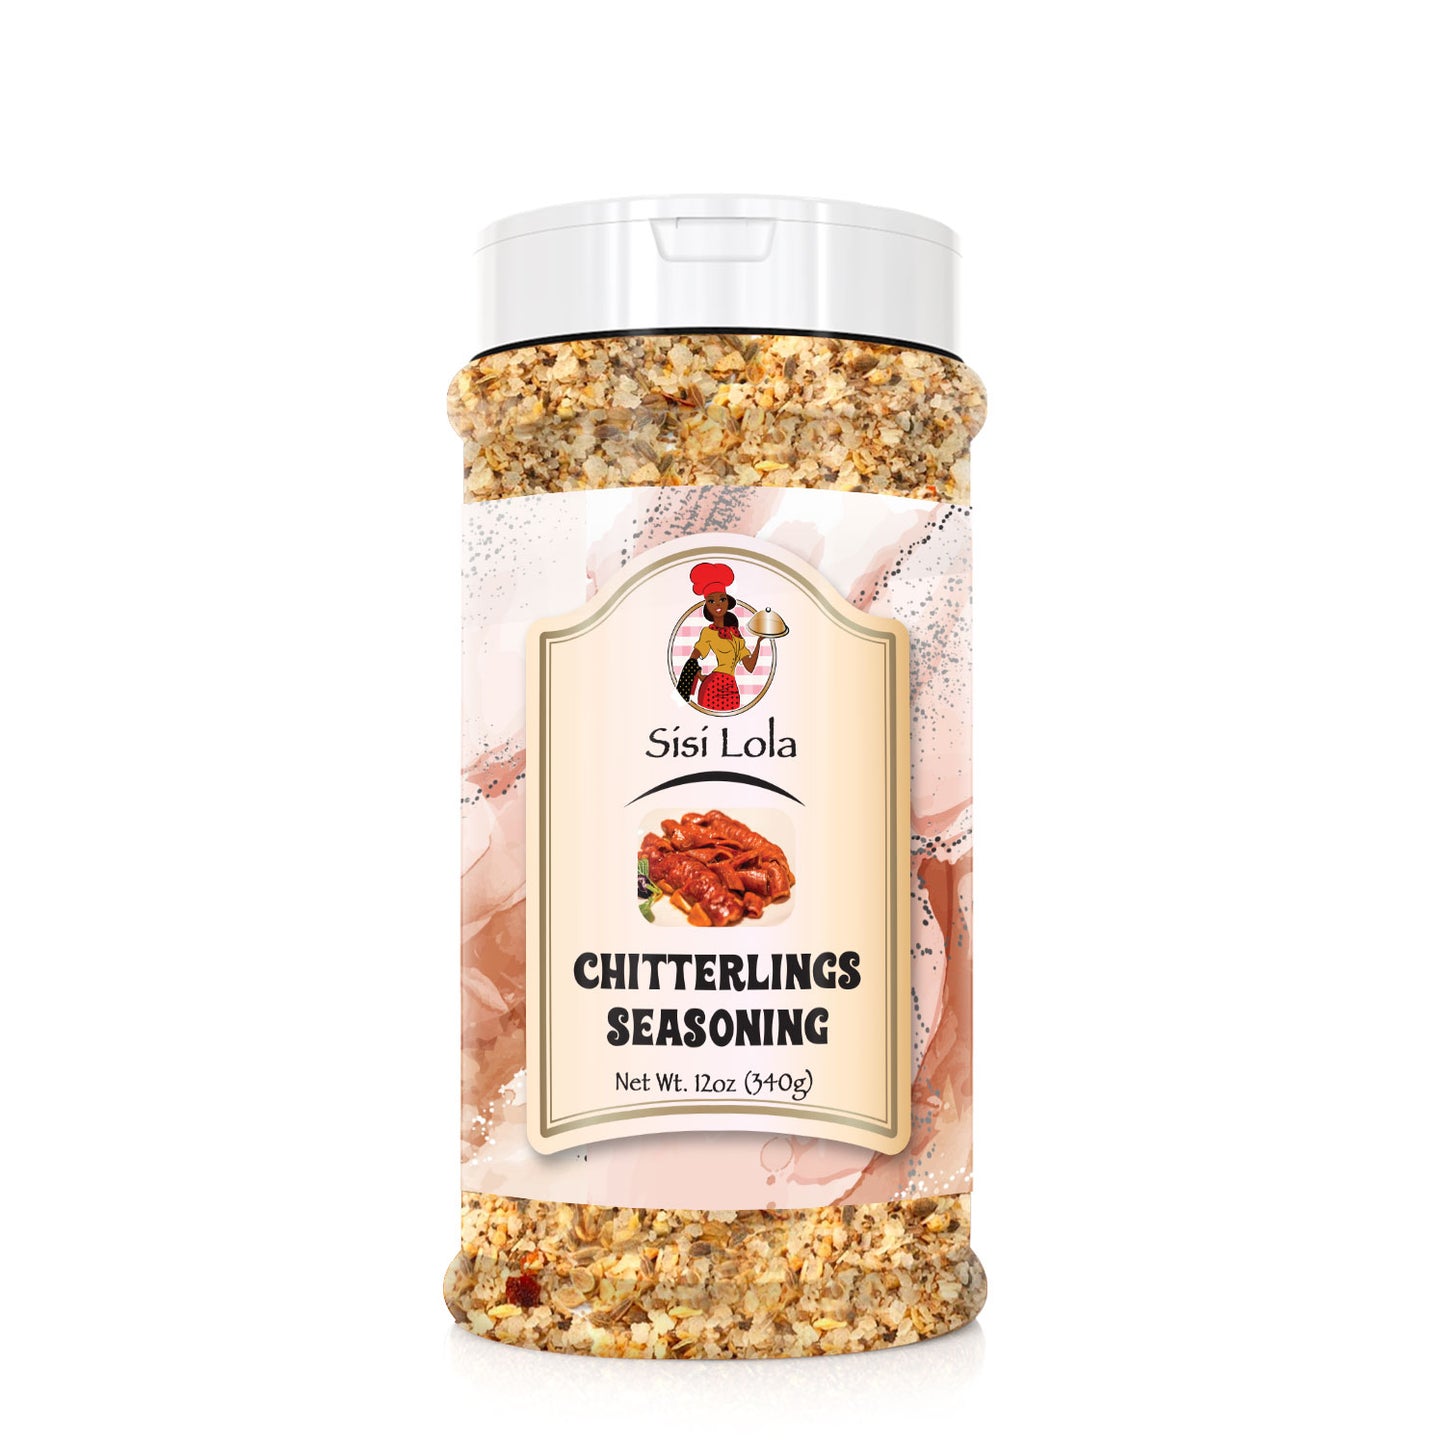 Feisty Spices Gourmet Chitterlings Seasoning, Zero Calories, Low Sodium, 8  Oz, Unique Blend. Seasoning for Chitterlings -  New Zealand